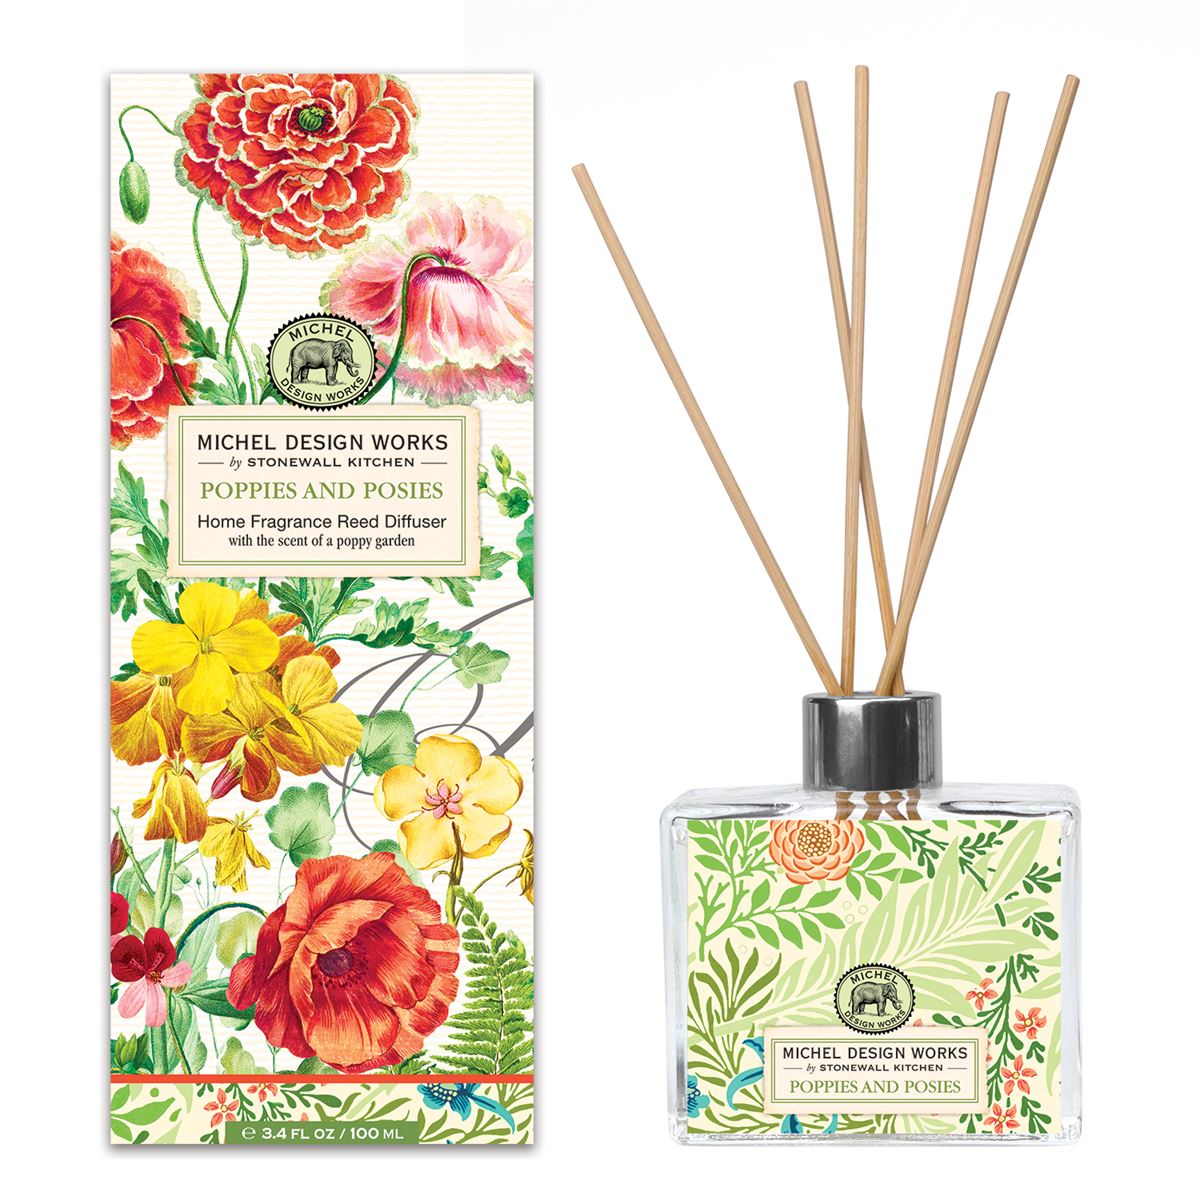 Michel Design Works - Poppies and Posies Home Fragrance Reed Diffuser